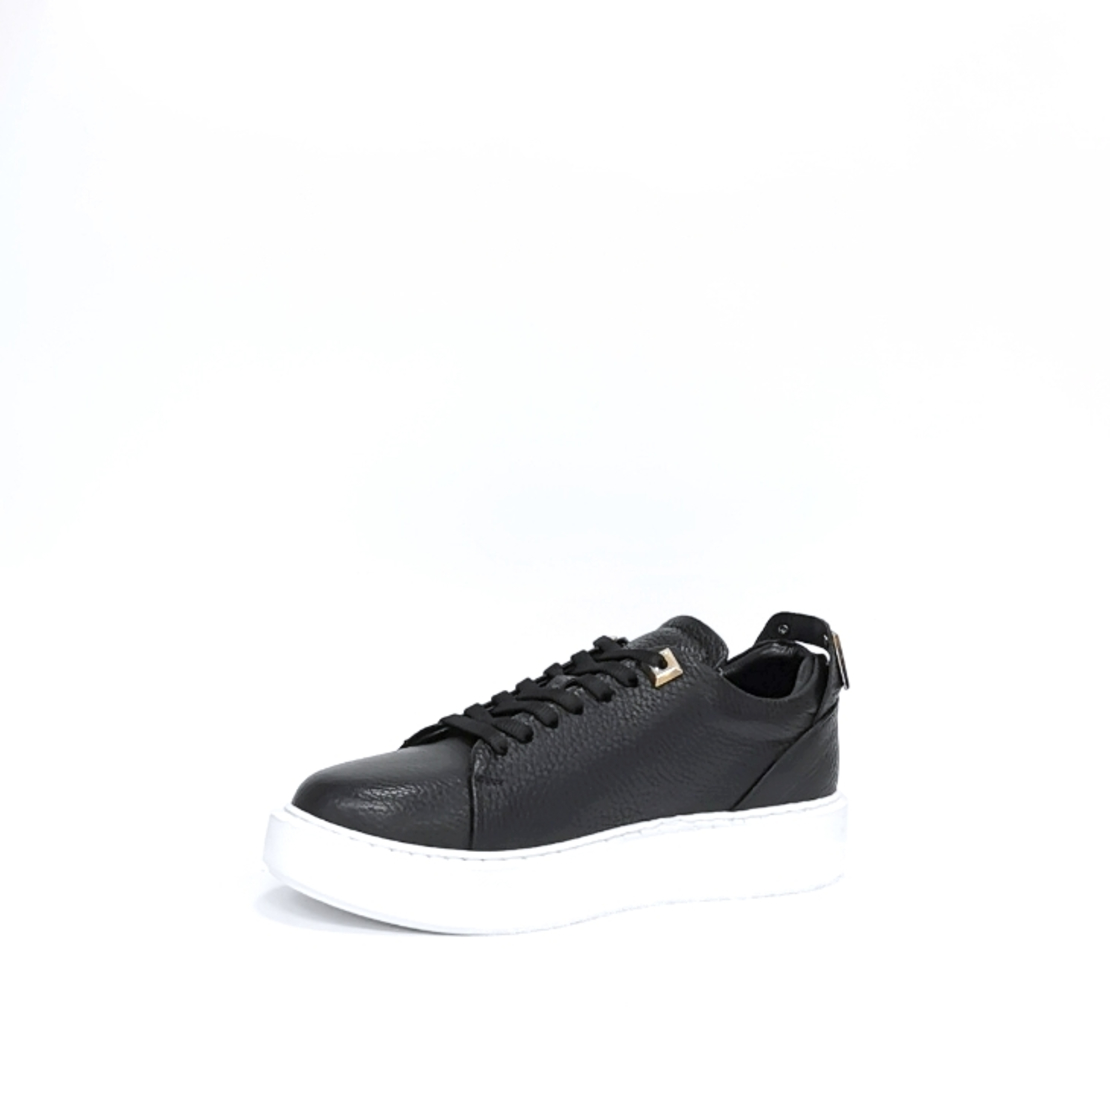 Women's sneaker made of natural leather in black color with anatomical insole/7785